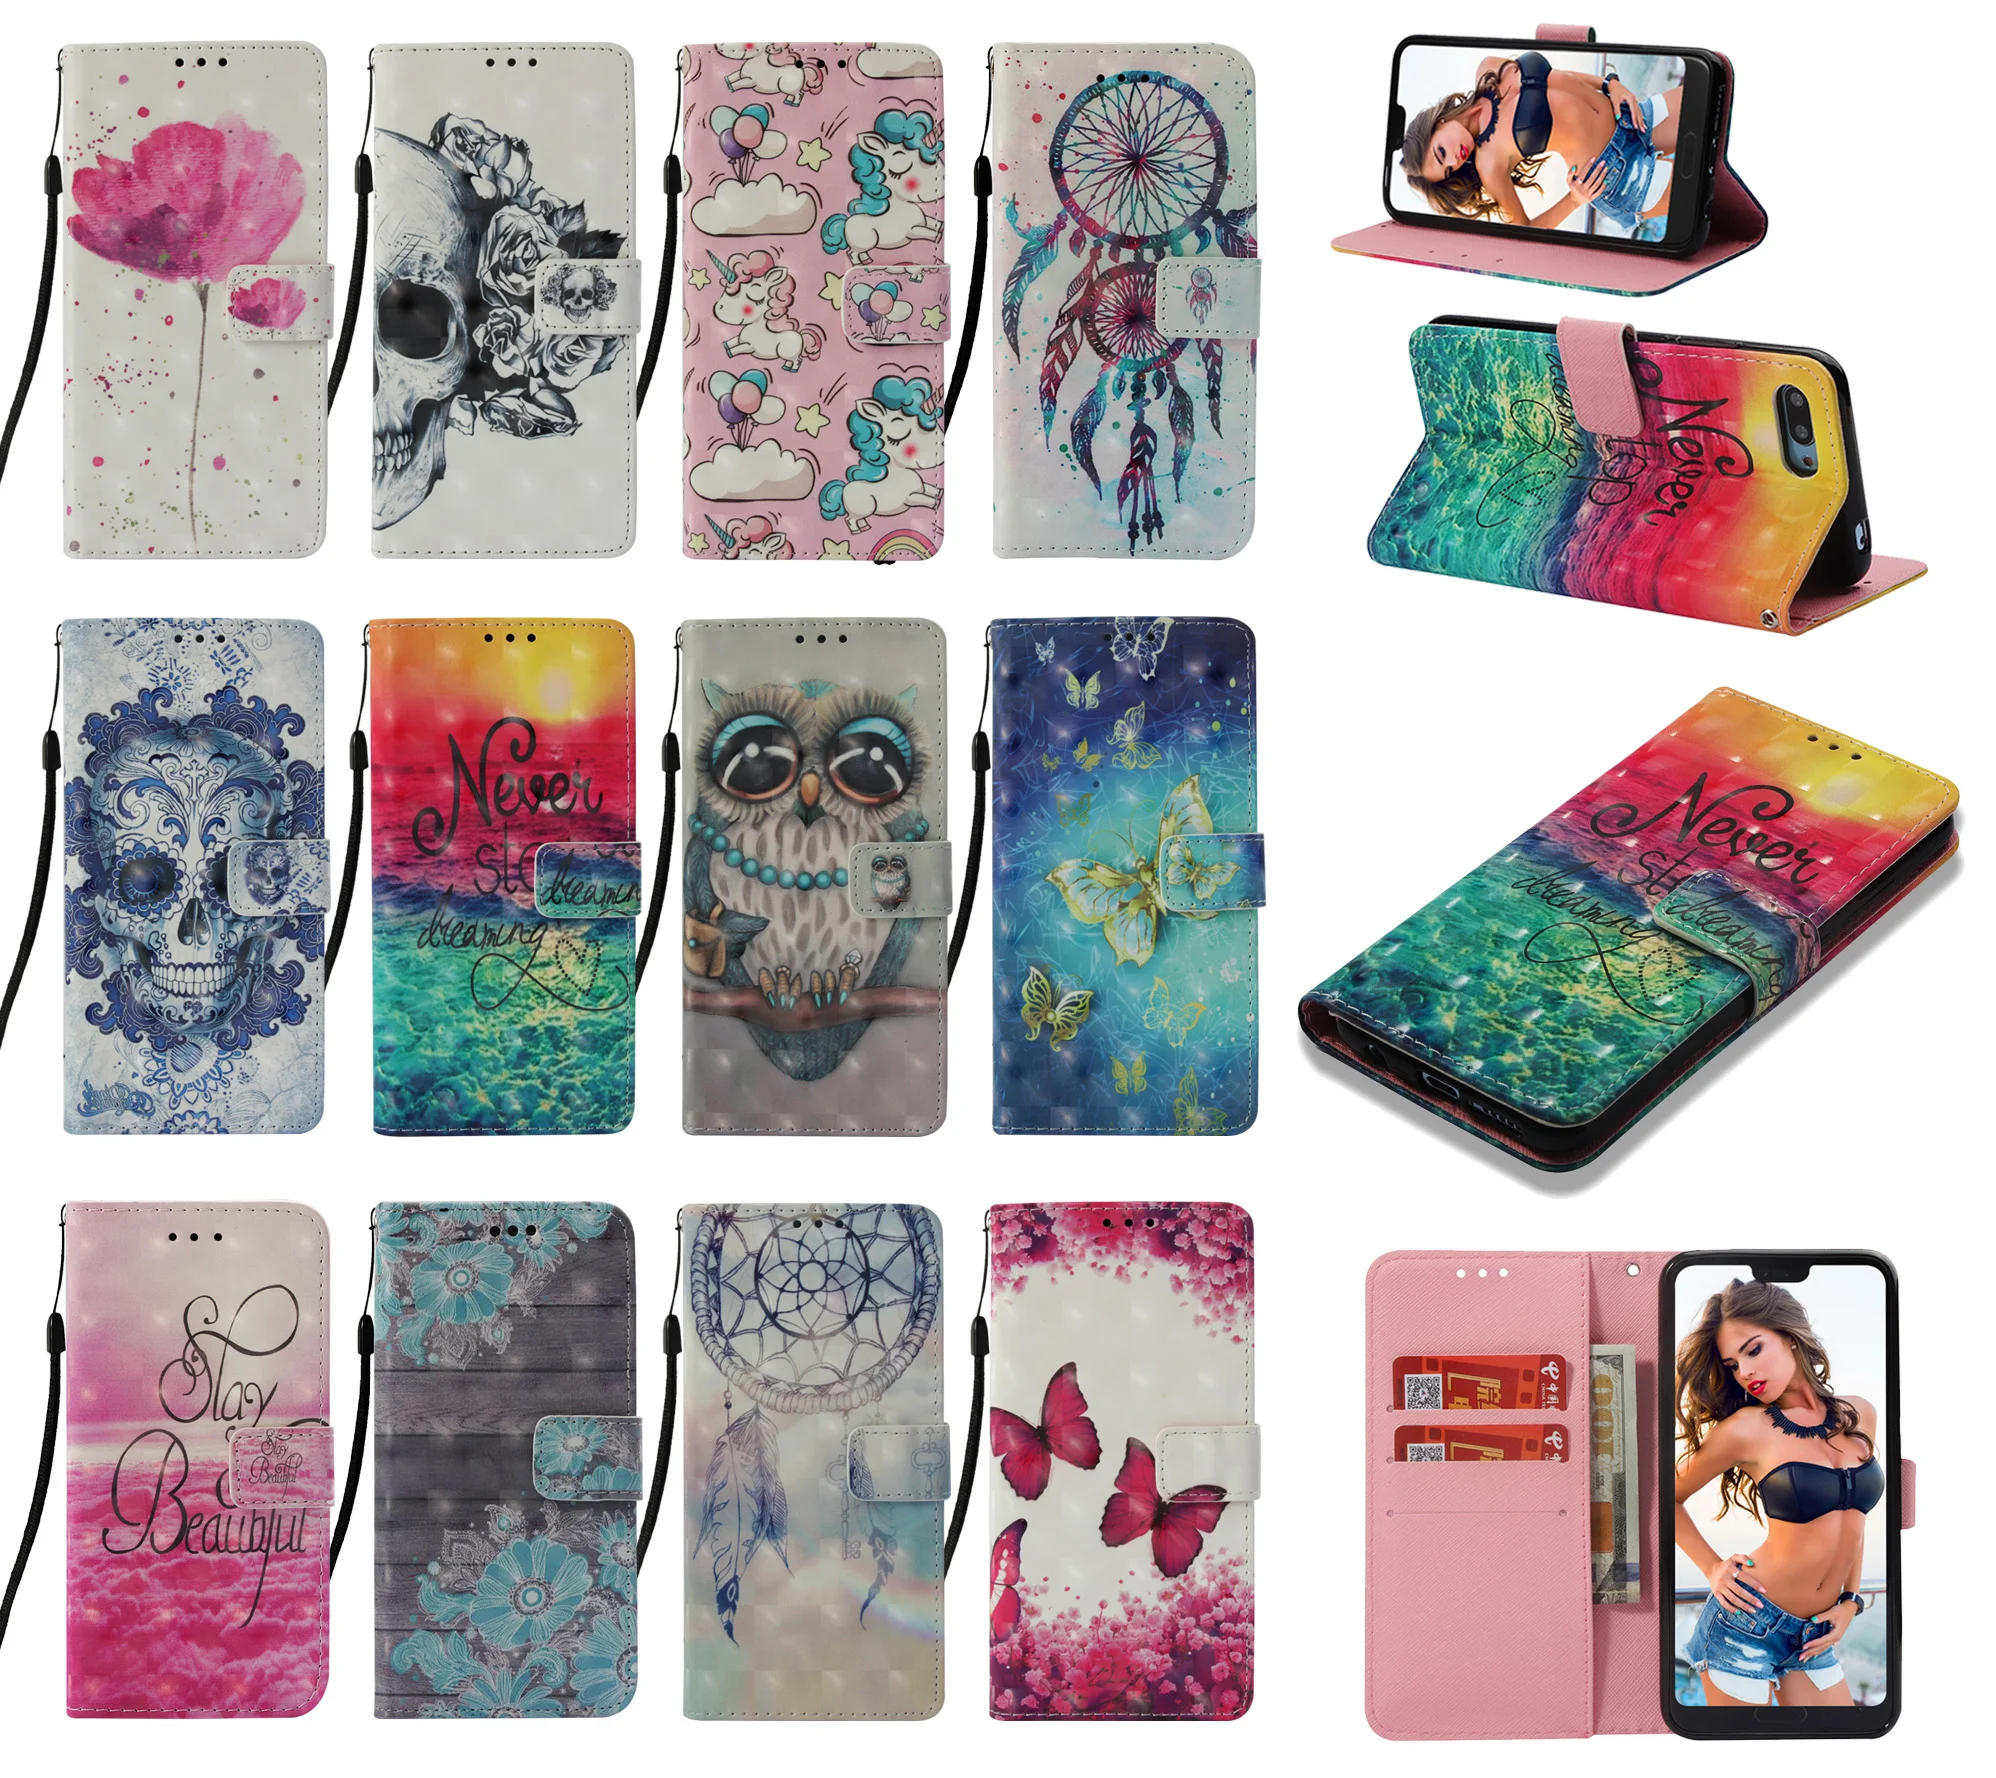 

Fashion 3D Painted Phone Cases For Samsung Galaxy A80 A60 A90 A20e A10e Note 10 Pro Plus M40 Flip Leather Wallet Cover Phone Bag